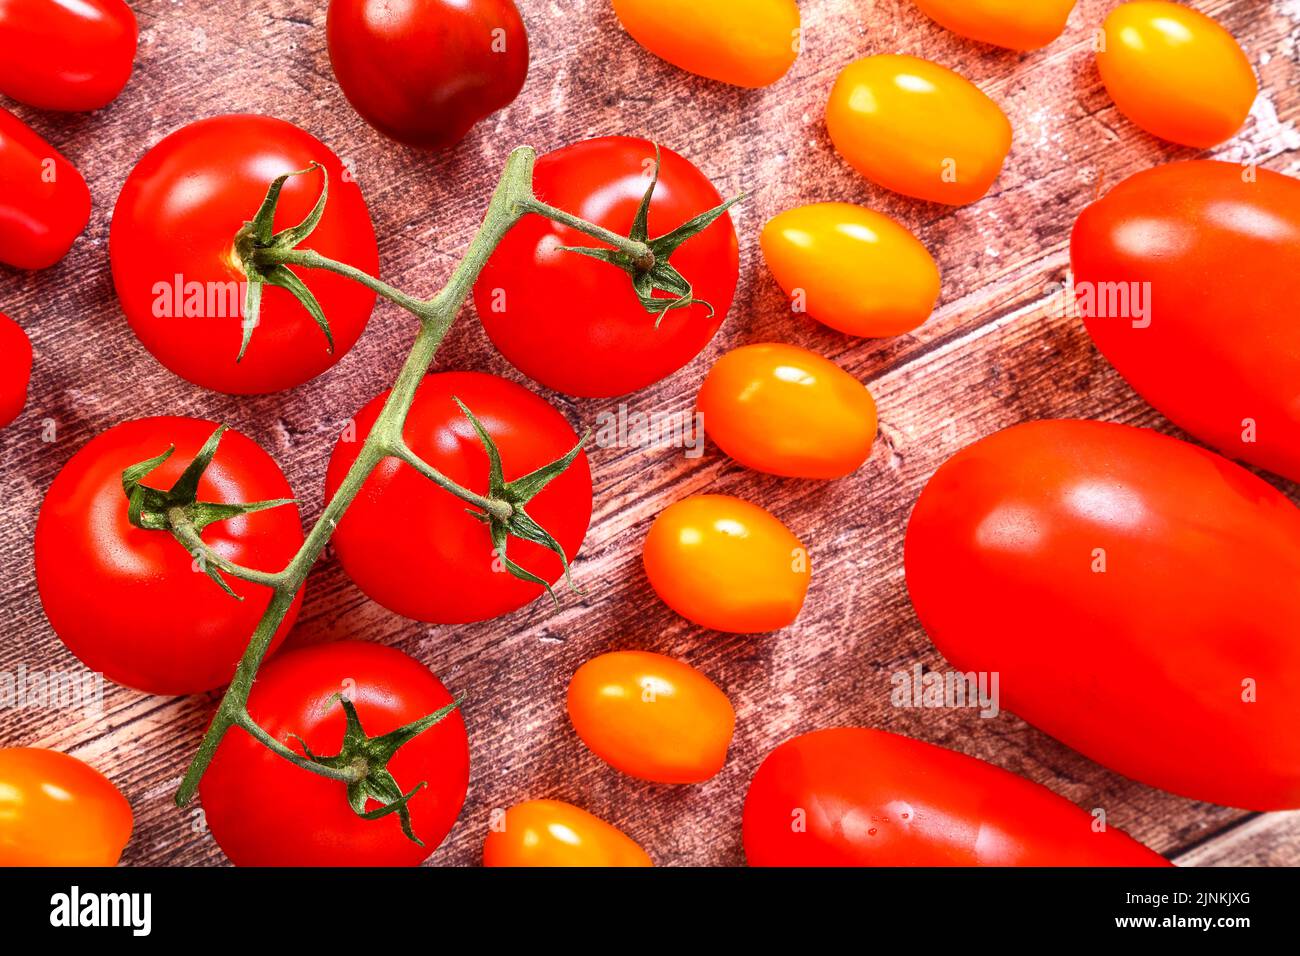 Mixed ripe tomatoes including vine, cherry and yellow in a flat lay view Stock Photo